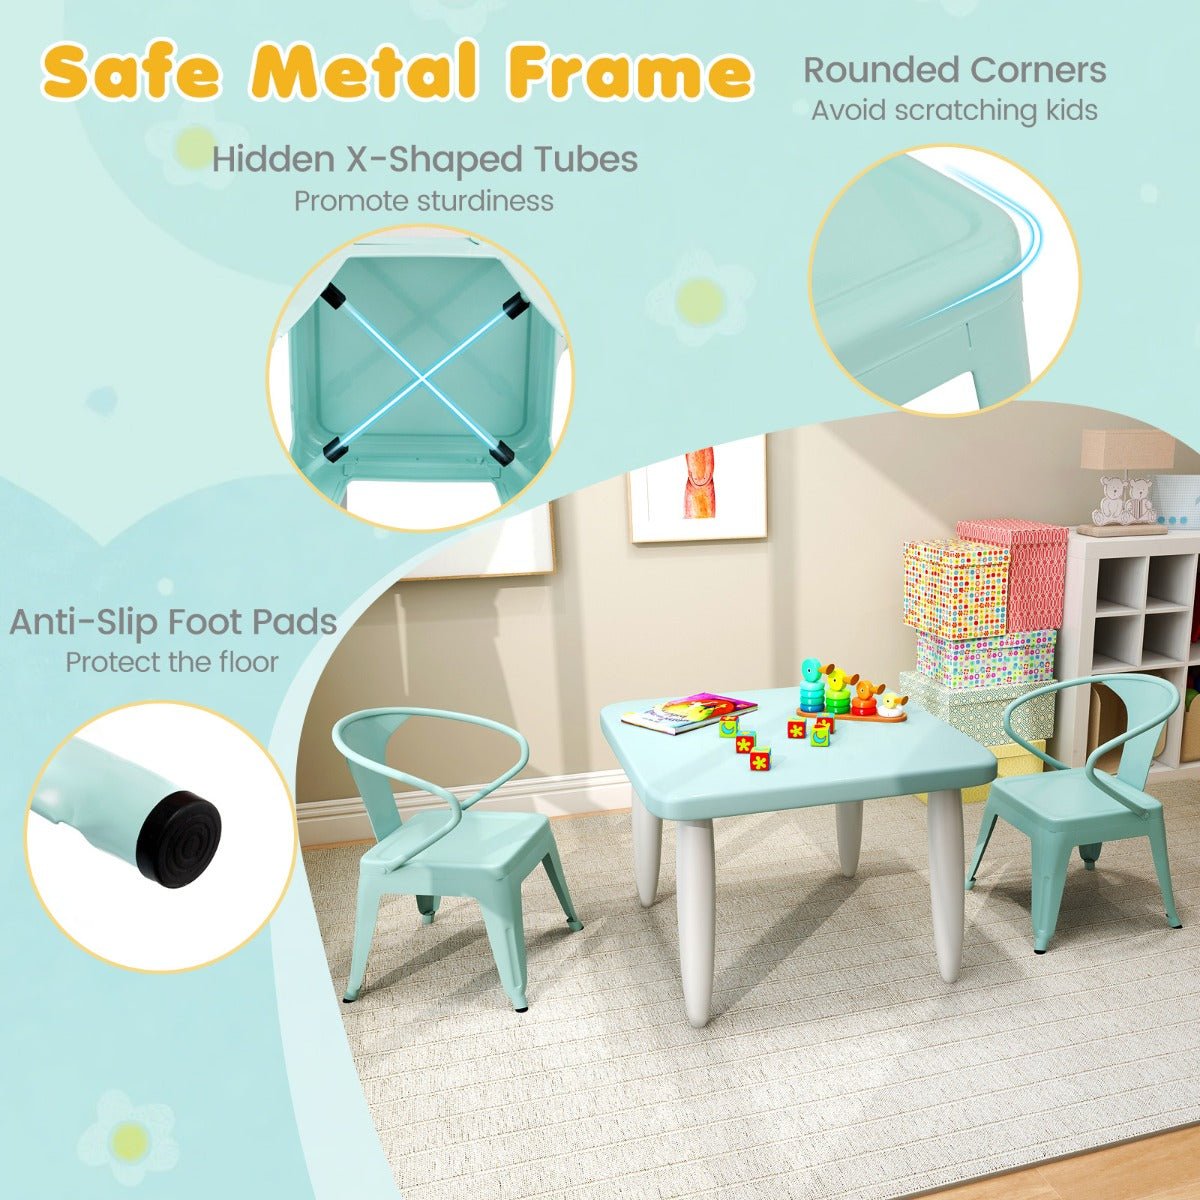 Safe and Exciting Furniture Set for Little Ones